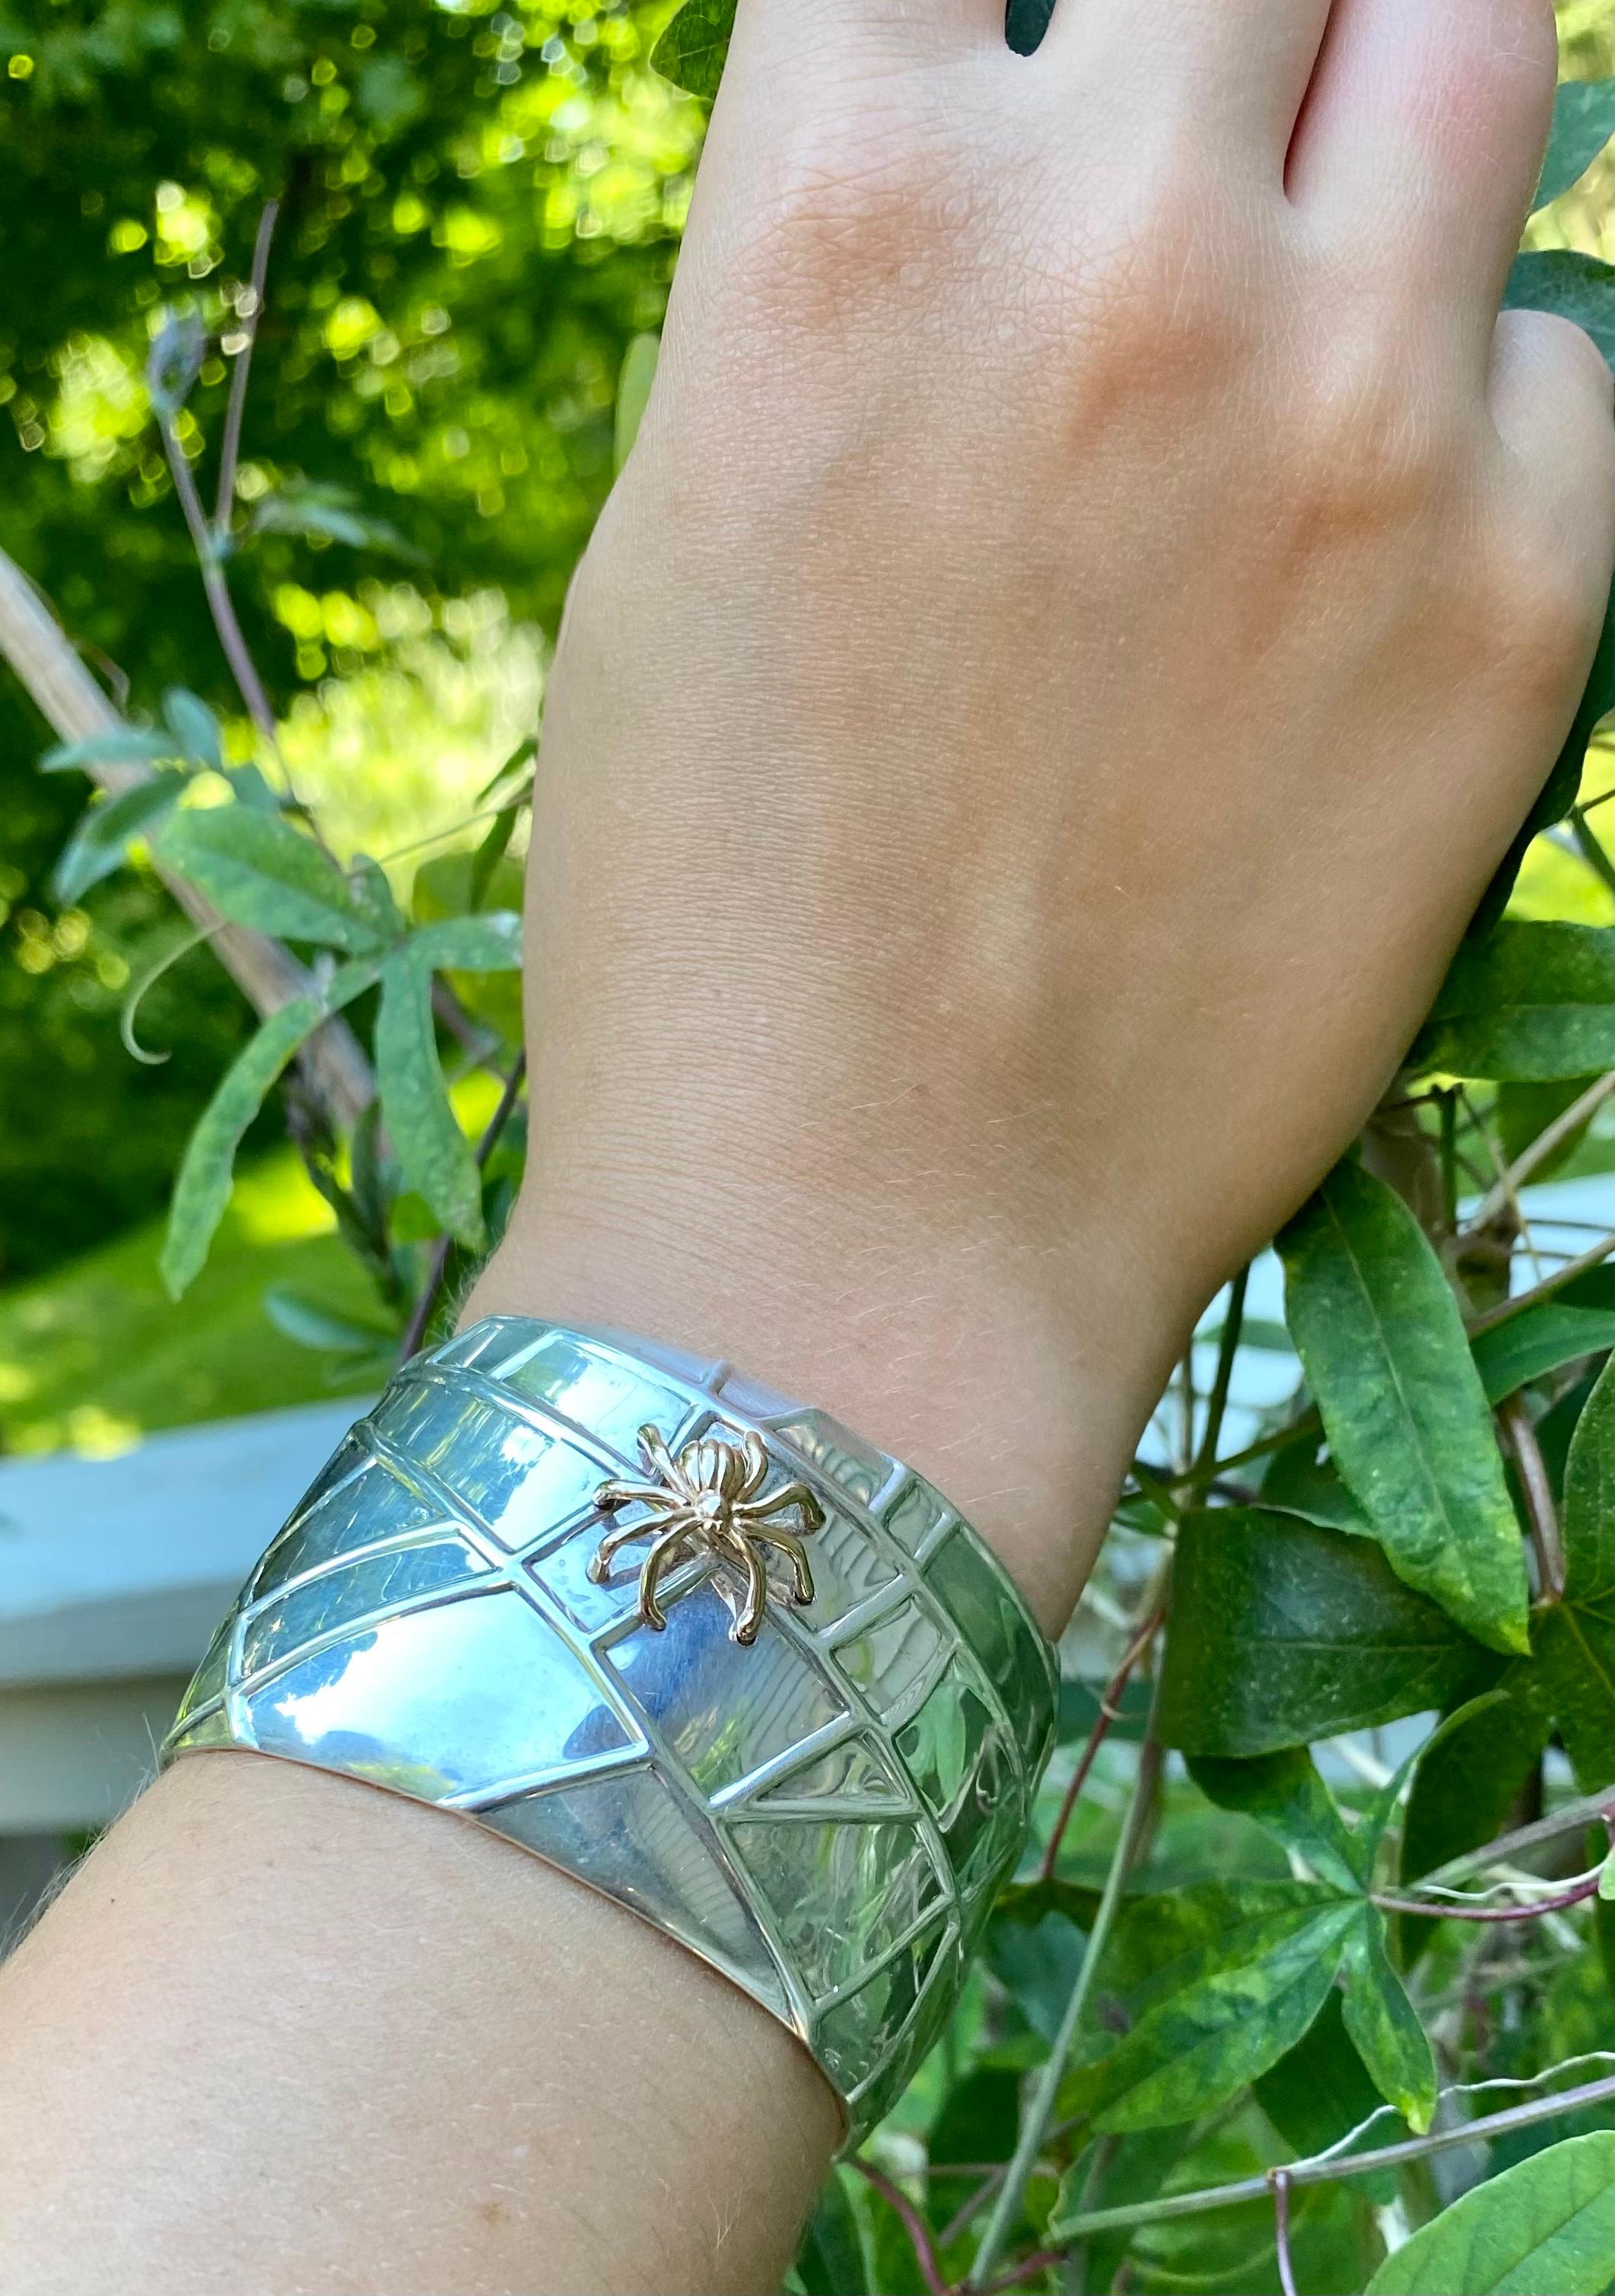 Dramatic statement Spider cuff bracelet by Tiffany & Co. in Sterling silver and 18K yellow gold 
Timeless organic motif modelled as a striking stylized sterling silver web with an 18K yellow gold spider in high relief.
Circa 2001
Fully signed and